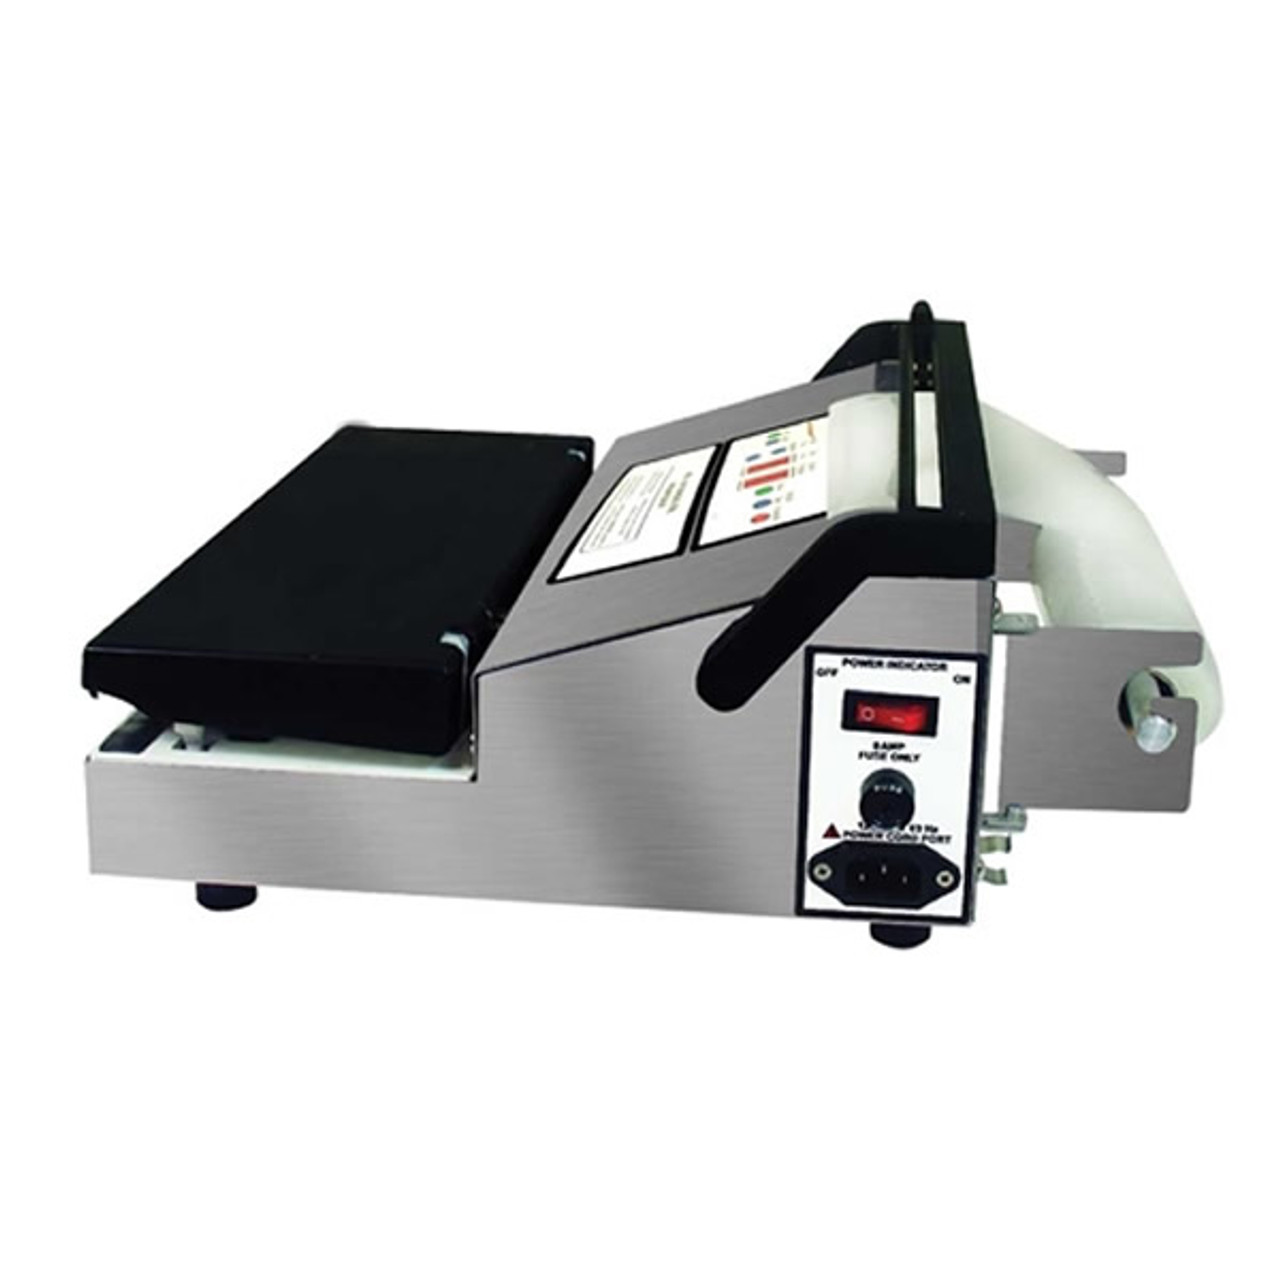 https://cdn11.bigcommerce.com/s-3n1nnt5qyw/images/stencil/1280x1280/products/31276/34486/weston-pro-1100-stainless-steel-vacuum-sealer-with-roll-cutter-model-65-0601-w-18__65458.1629776290.jpg?c=1?imbypass=on